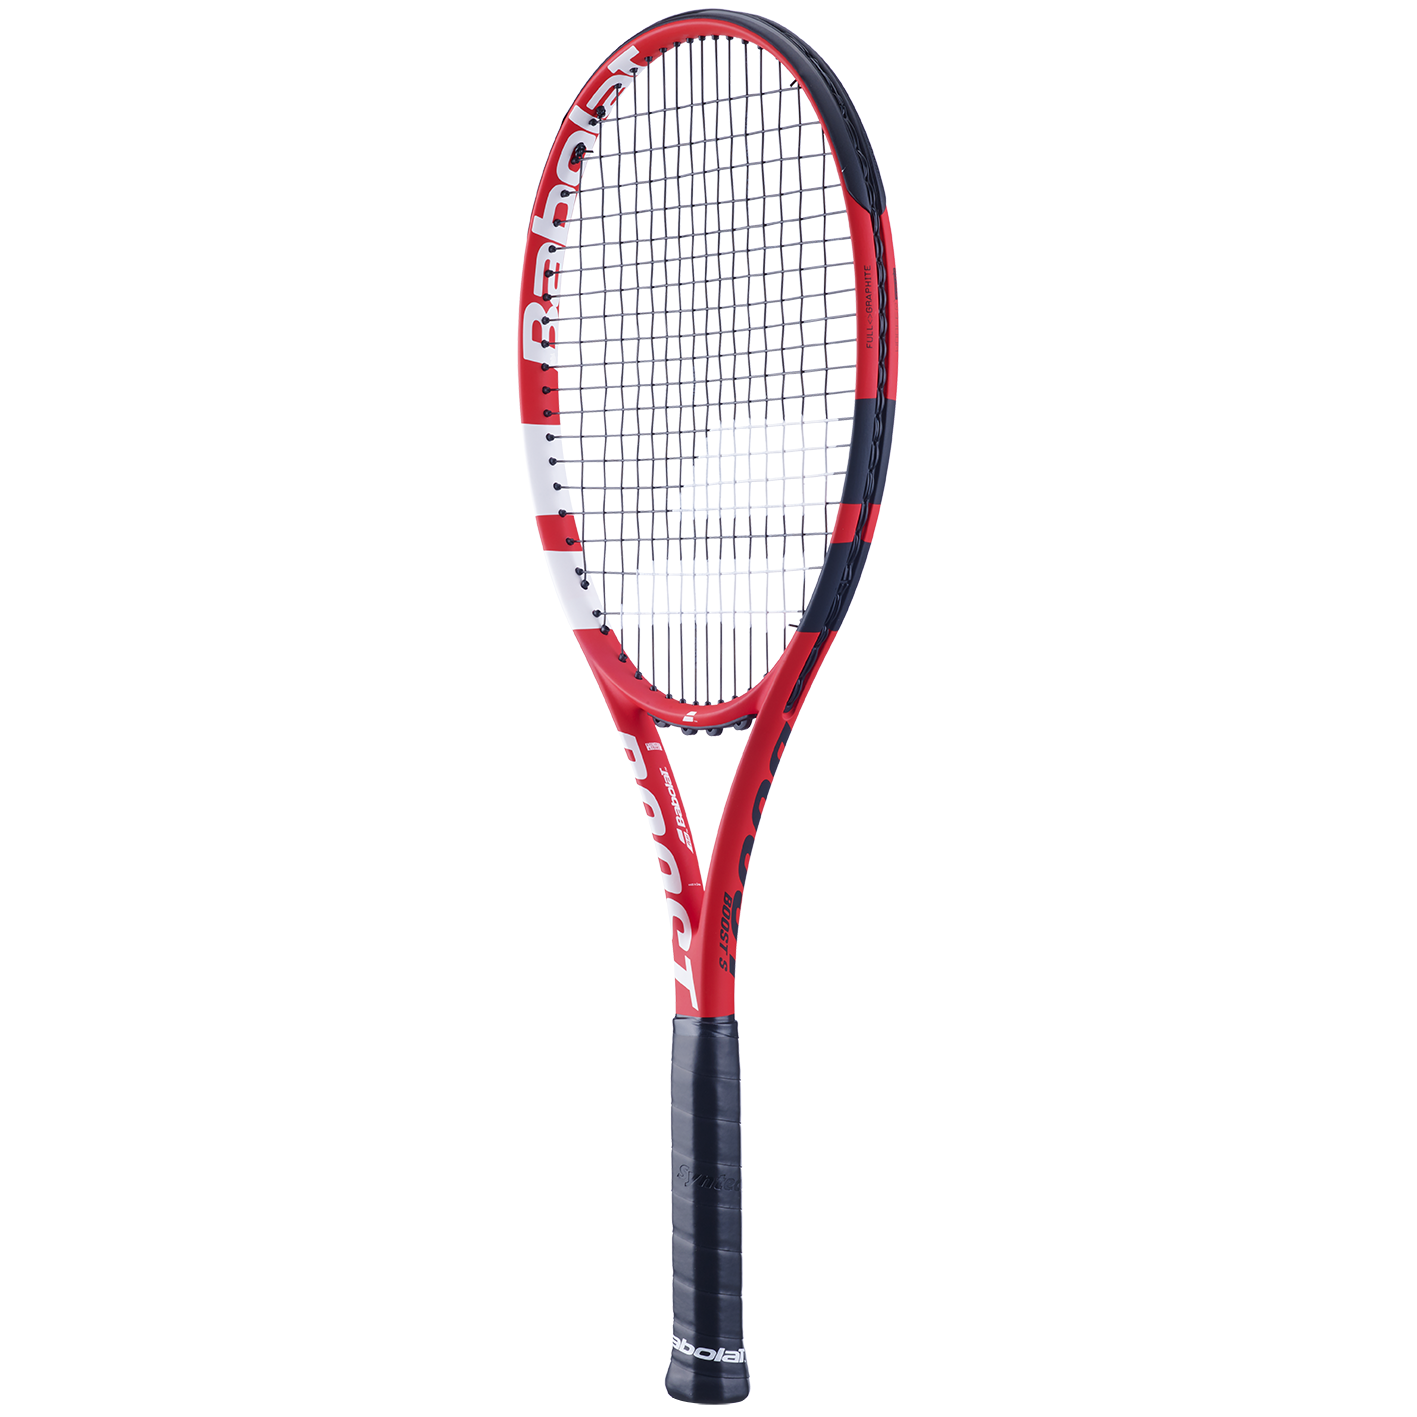 Babolat Boost S Tennis Racket - Red